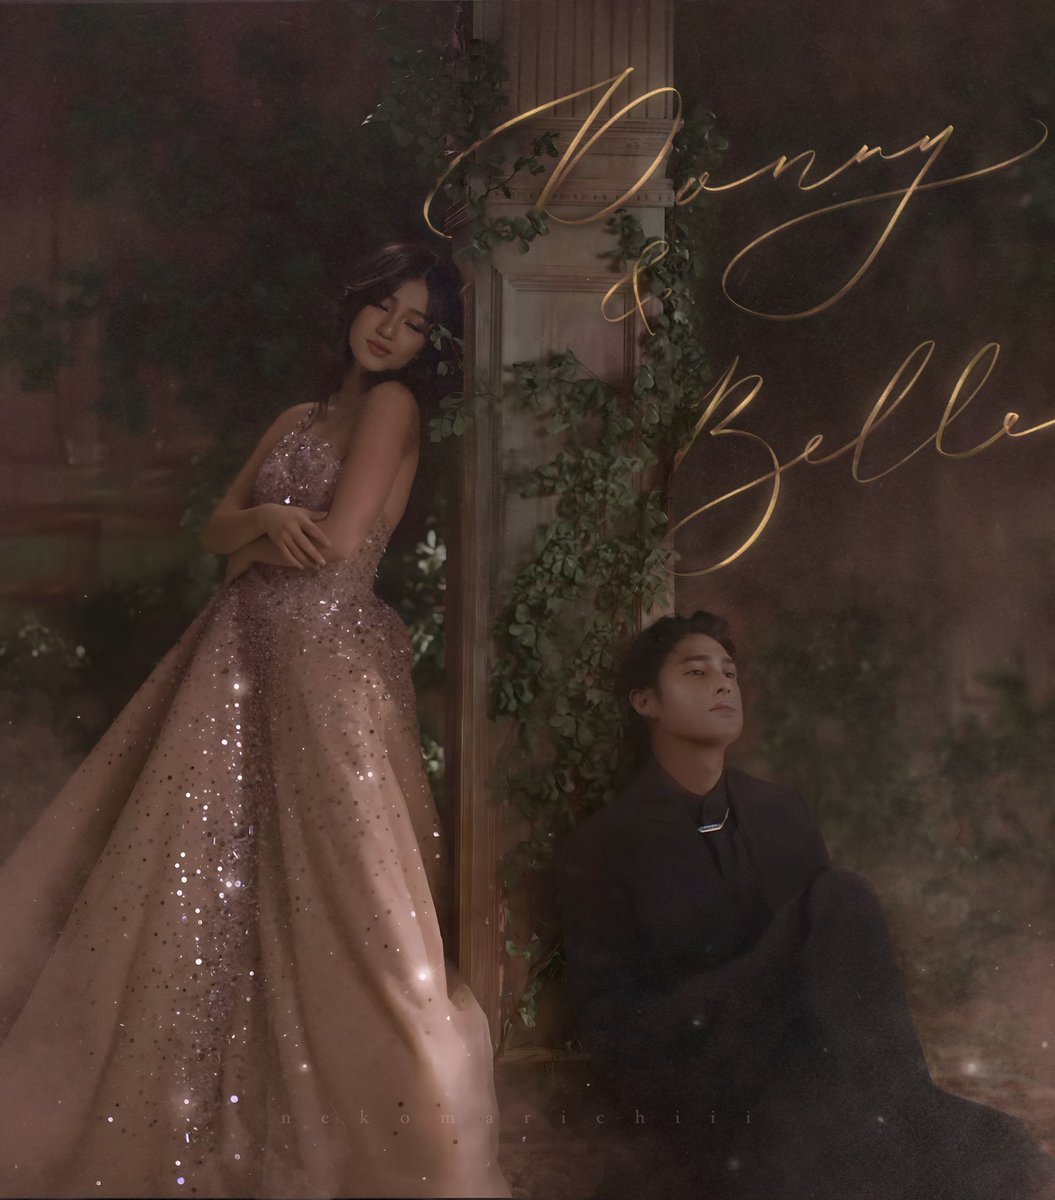 #DonBelle 
Our King and Queen of Star Magical Prom 2023

Bringing this back and added some gold lettering. Fits perfectly! Royalty vibes!

**edited DB photo**

#StarMagicalProm2024 
#AFairyTaleBeginning